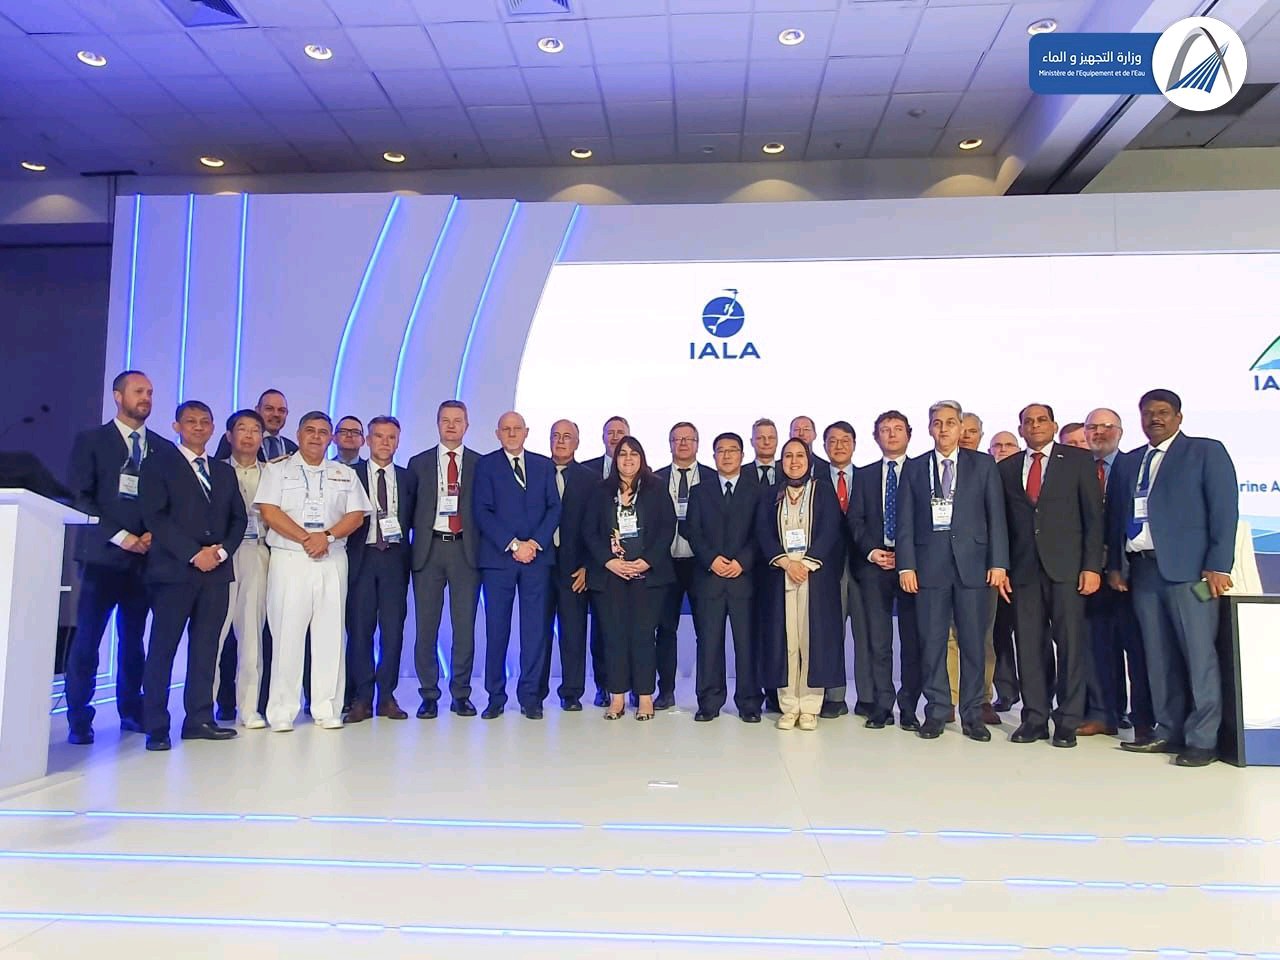 Morocco re-elected member of the Council of the International Association of Marine Aids to Navigation and Lighthouse Authorities (IALA) for 2023-2027